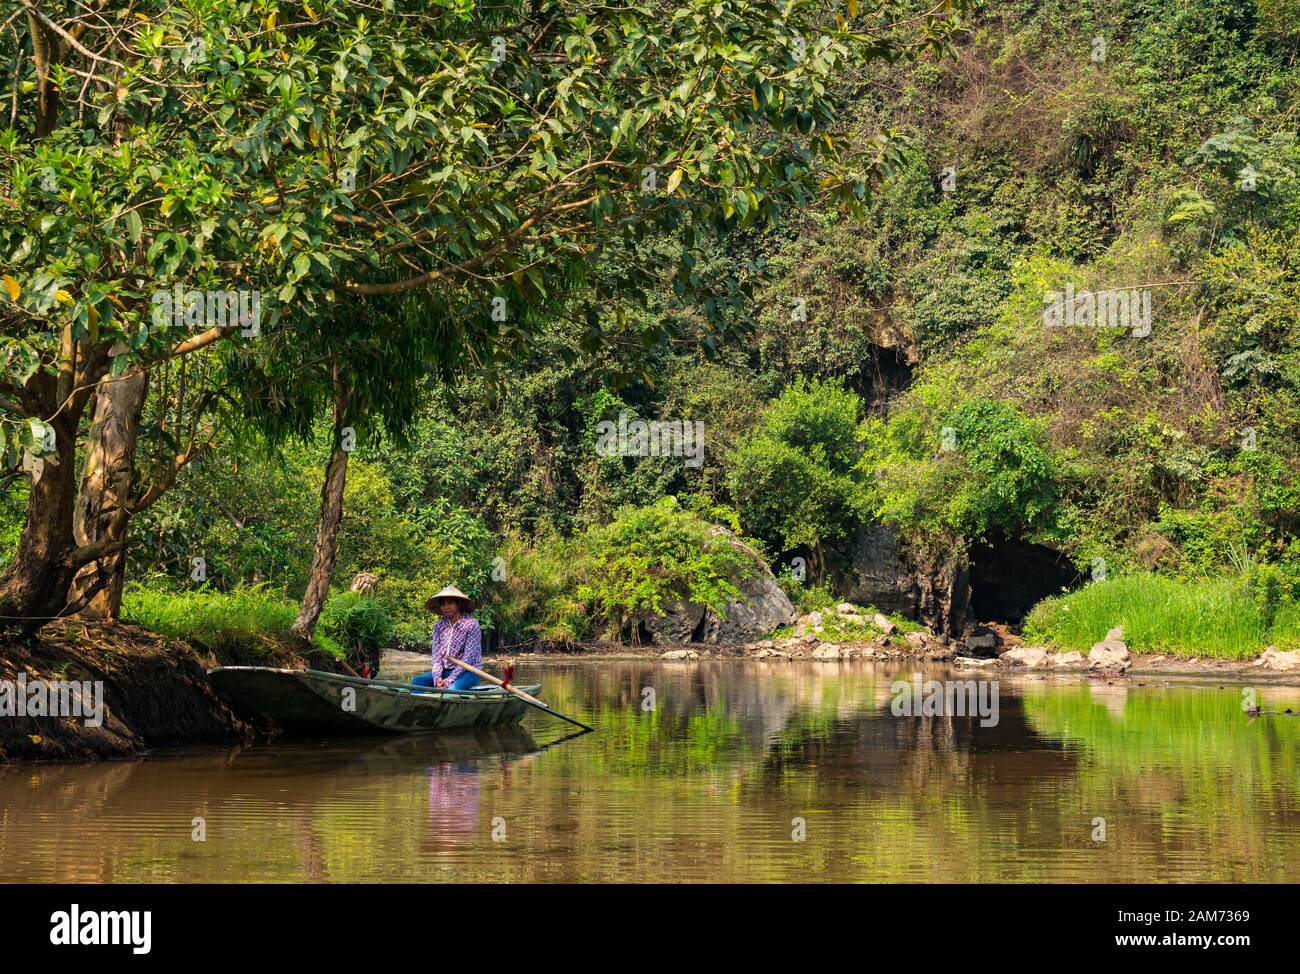 Local Asian woman wearing conical hat sitting in sampan on river with cavern entrance, Tam Coc cave system, Ninh Binh, Vietnam, Asia Stock Photo